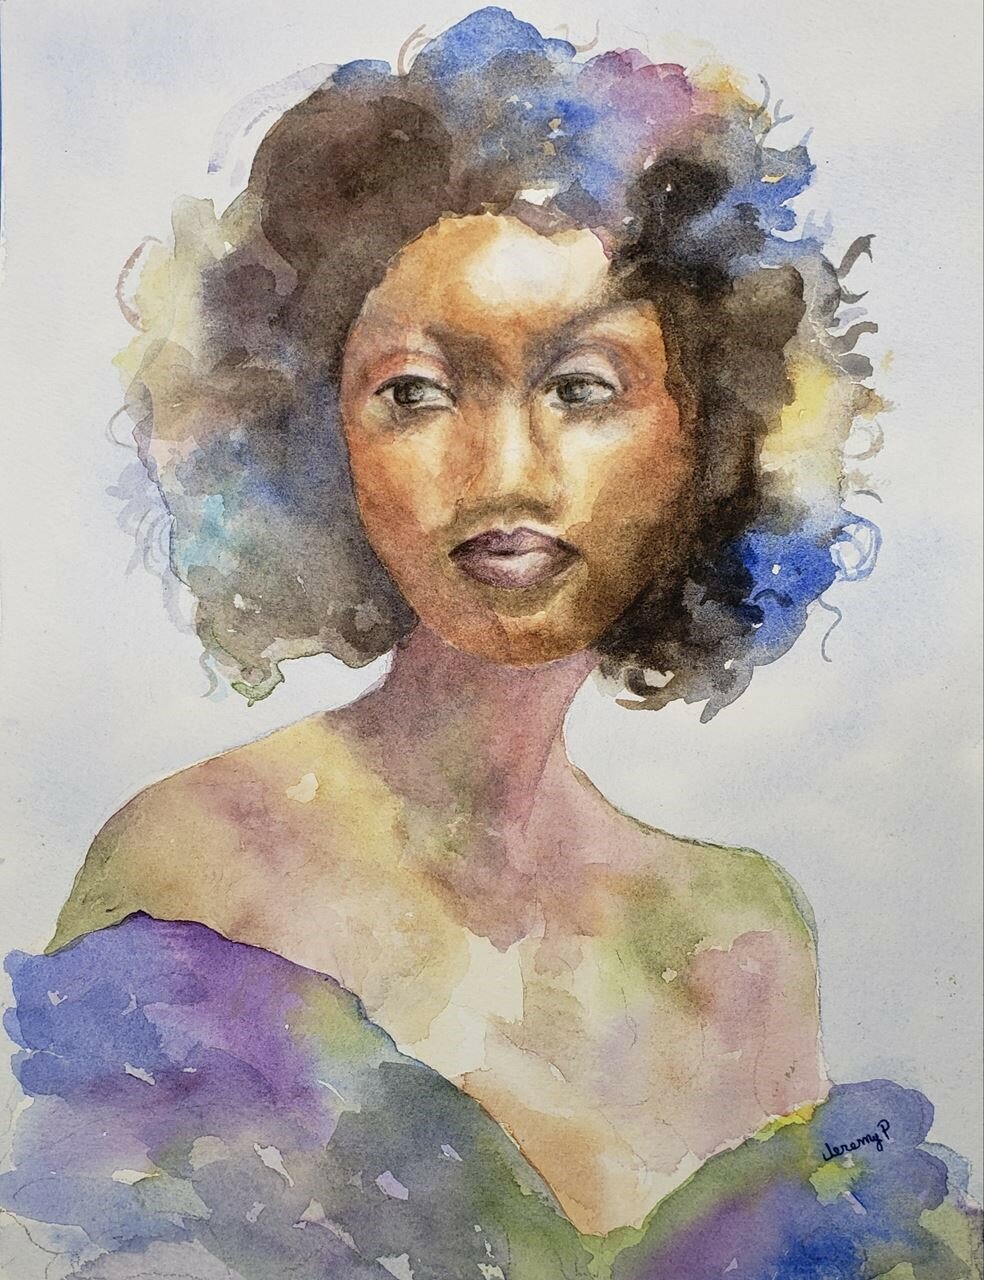 Winner of the 3rd Place award of $250 is “Lillian,” a watercolor by Jeremy Parry.